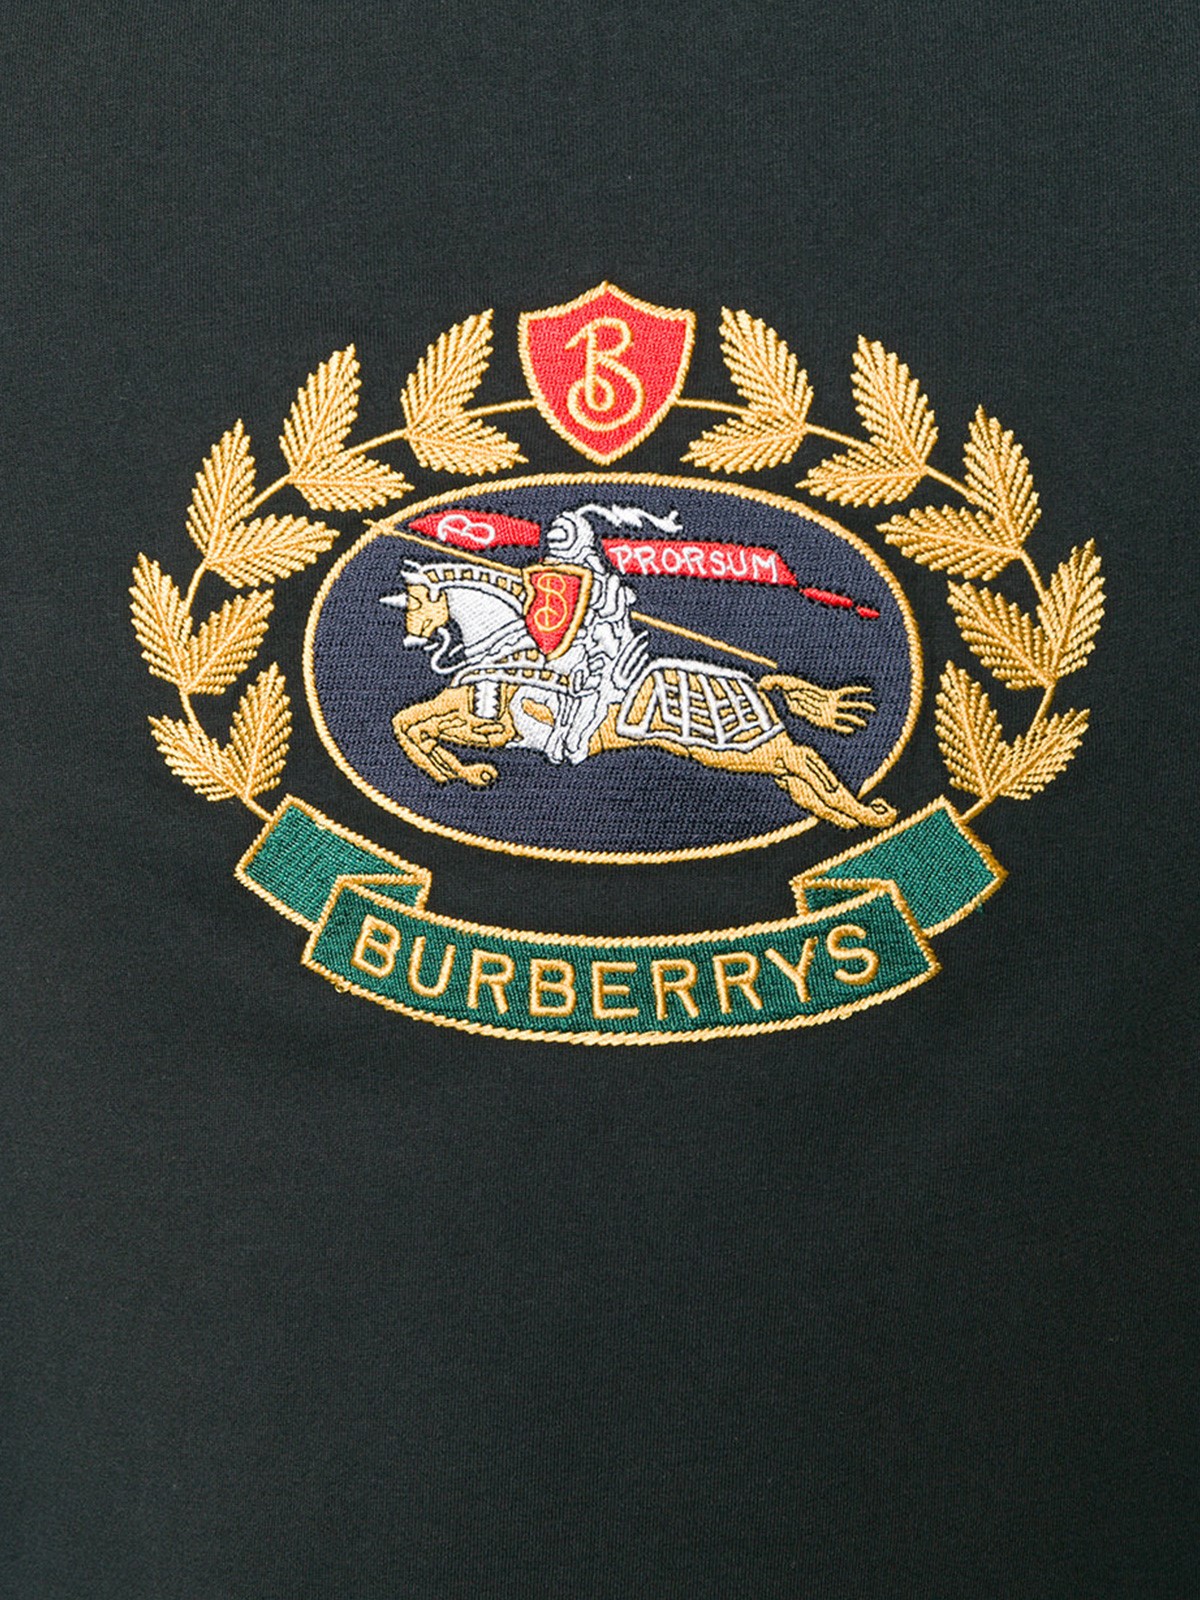 burberry EMBROIDERED LOGO T-SHIRT available on montiboutique.com - 23181